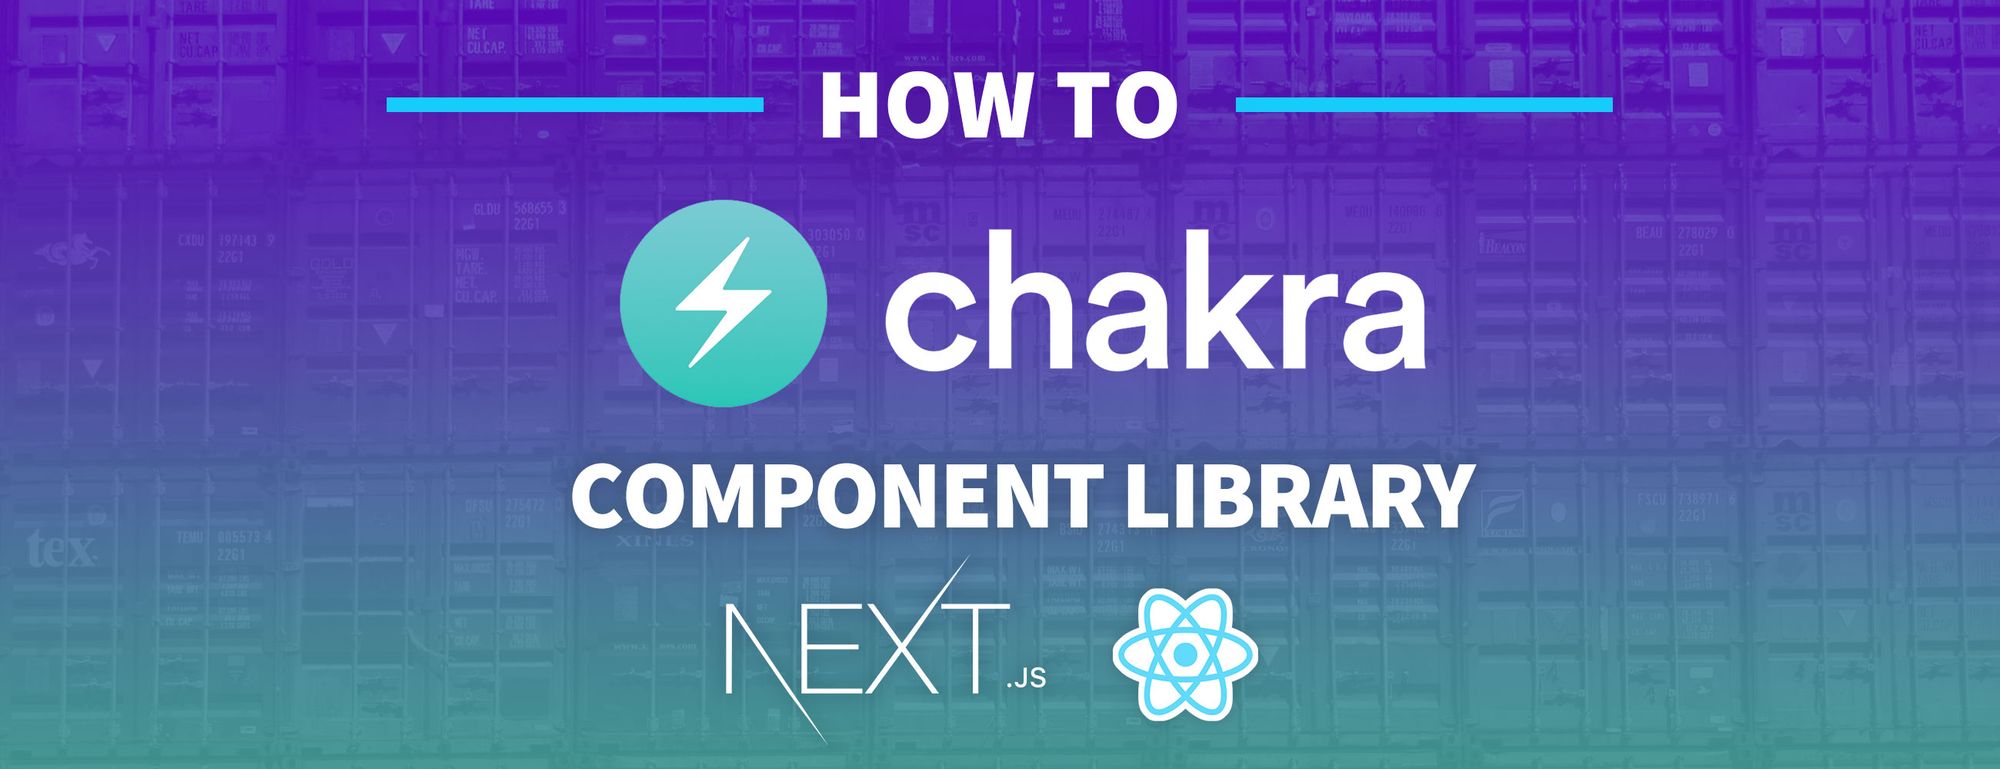 How to Use Chakra UI with Next.js and React